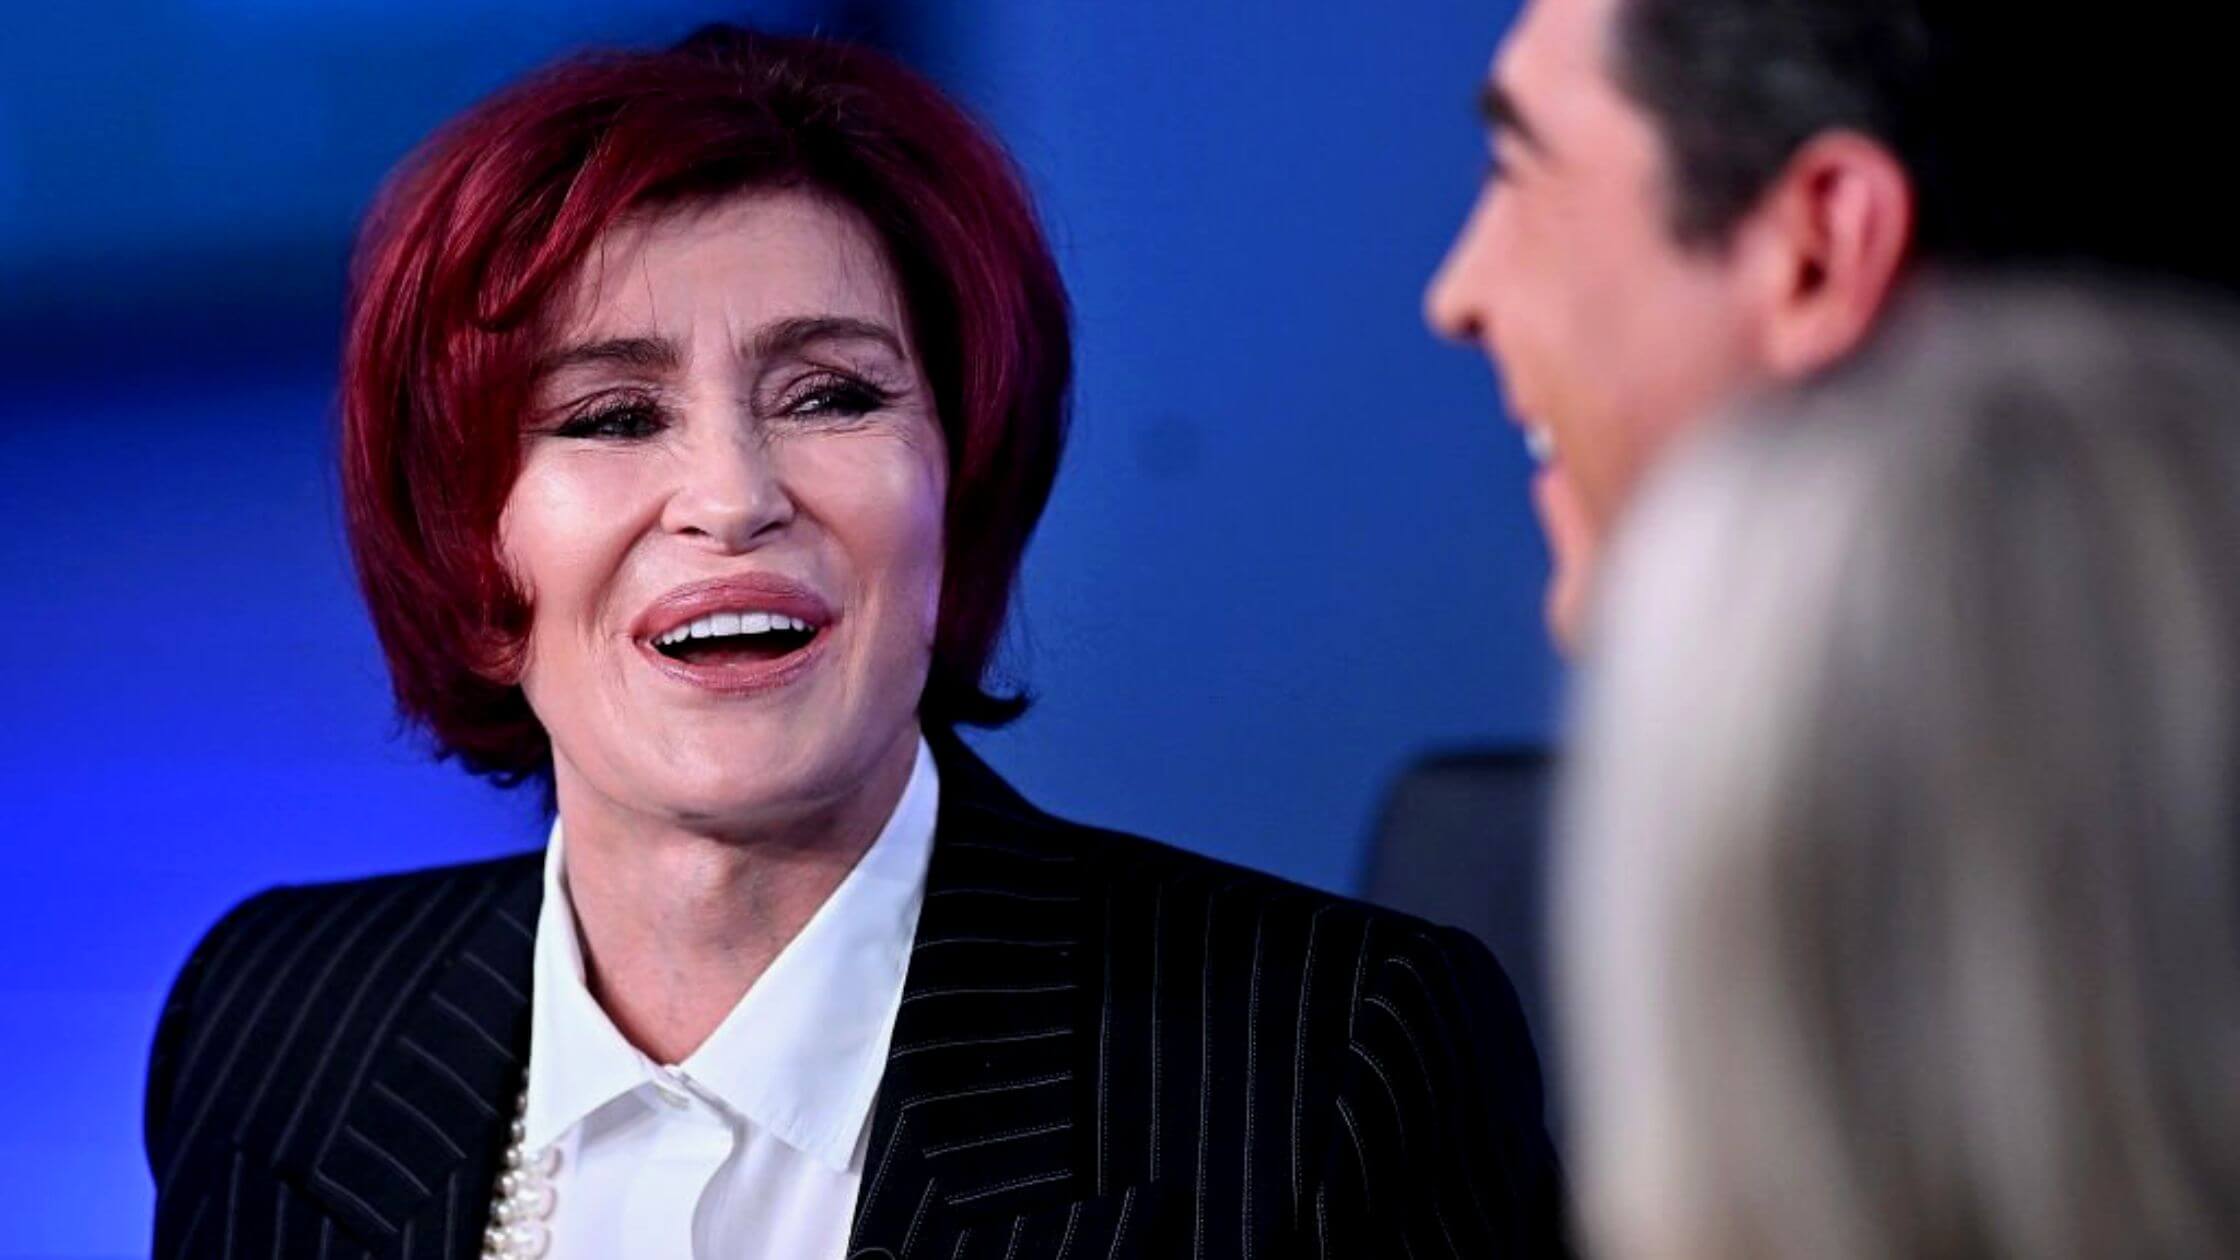 Kelly Osbourne Talks About Baby After Sharon Osbourne Announced His Birth